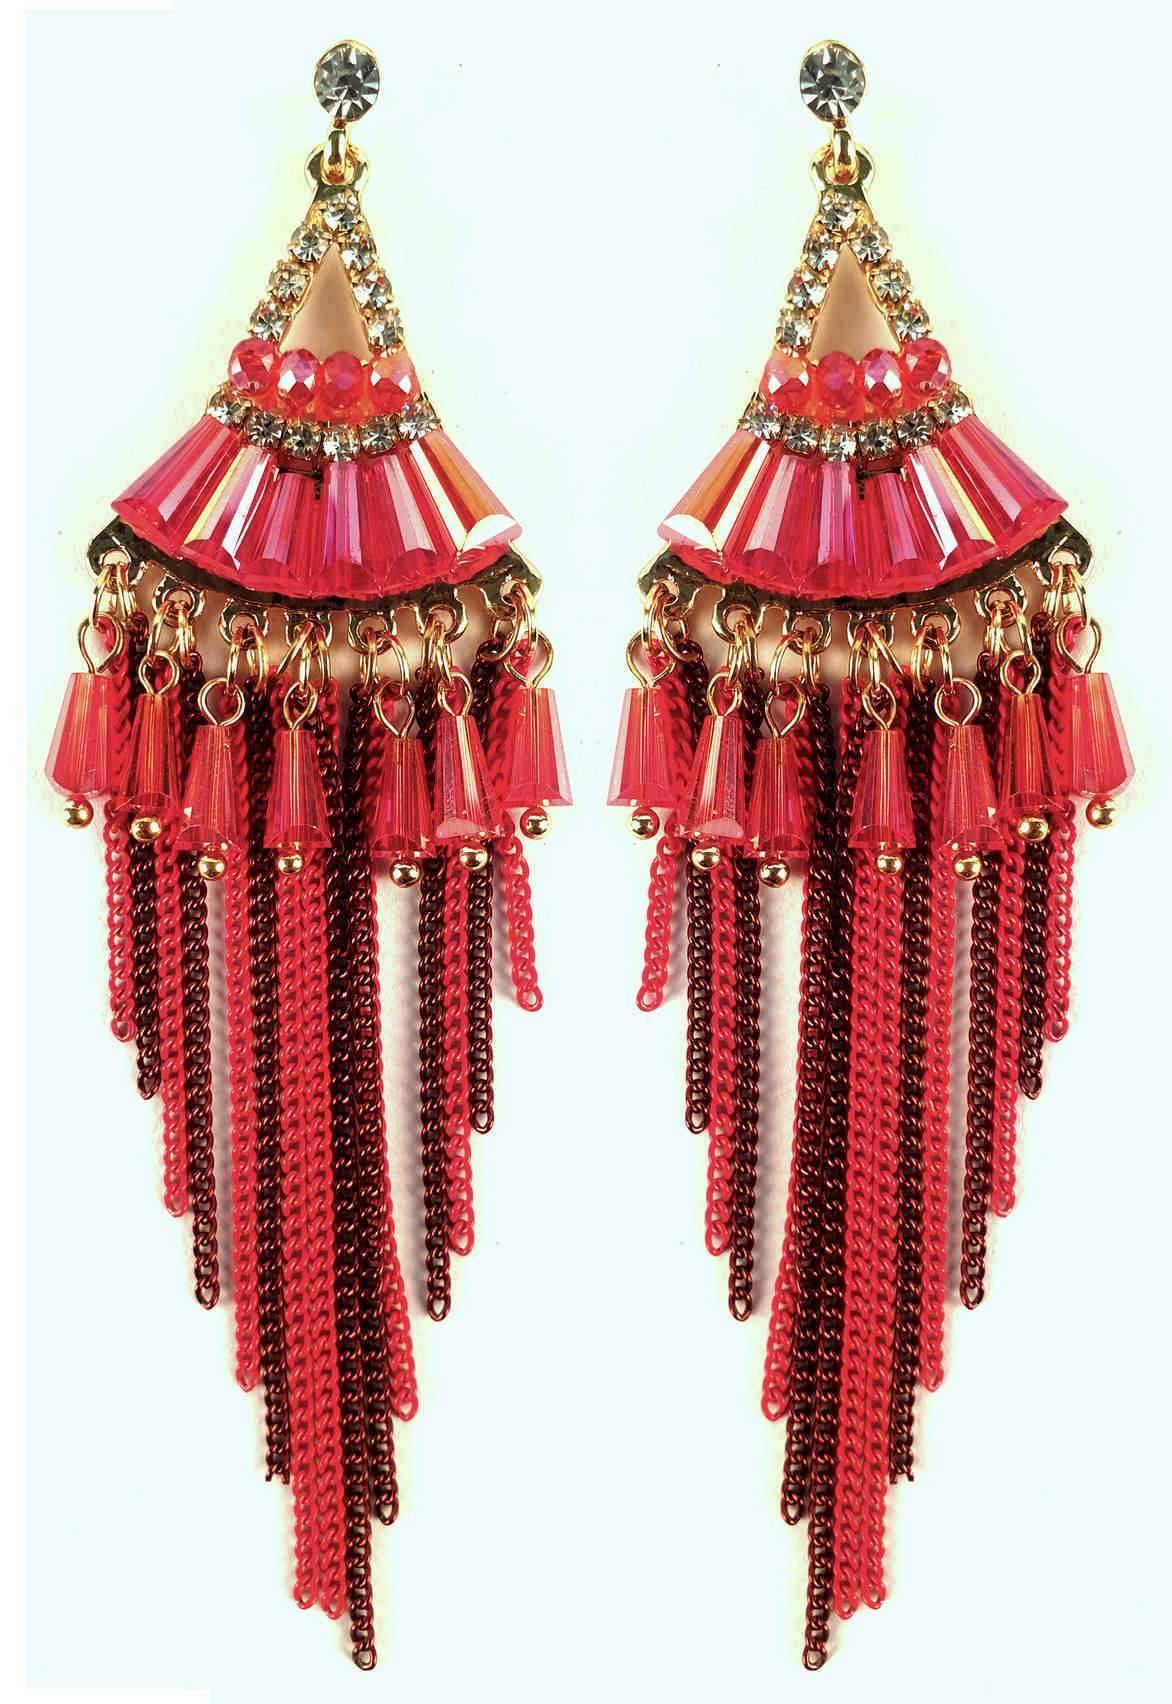 Indian Petals Chandelier Design Artificial Fashion Dangler Earrings Jhumka with Tassales for Girls Women, Red